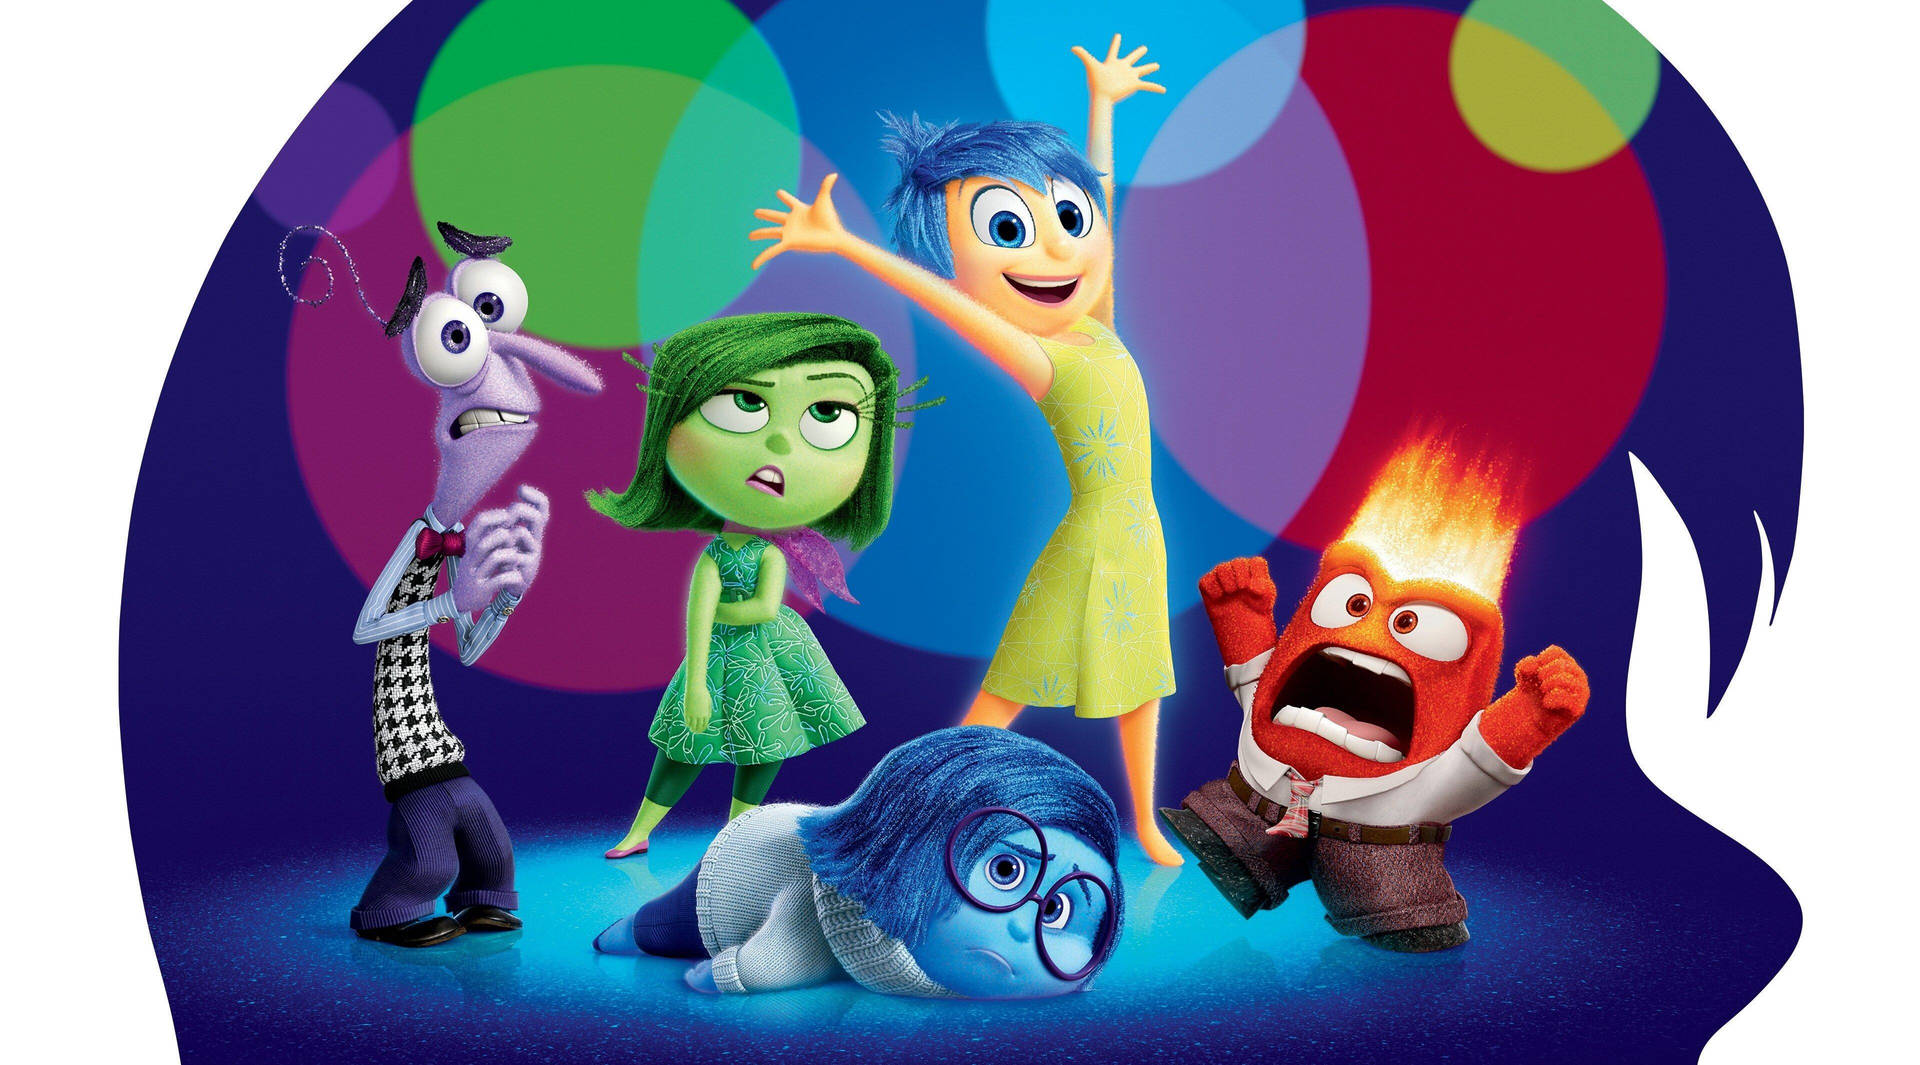 Joy and Emotions on an Adventure - Inside Out Wallpaper